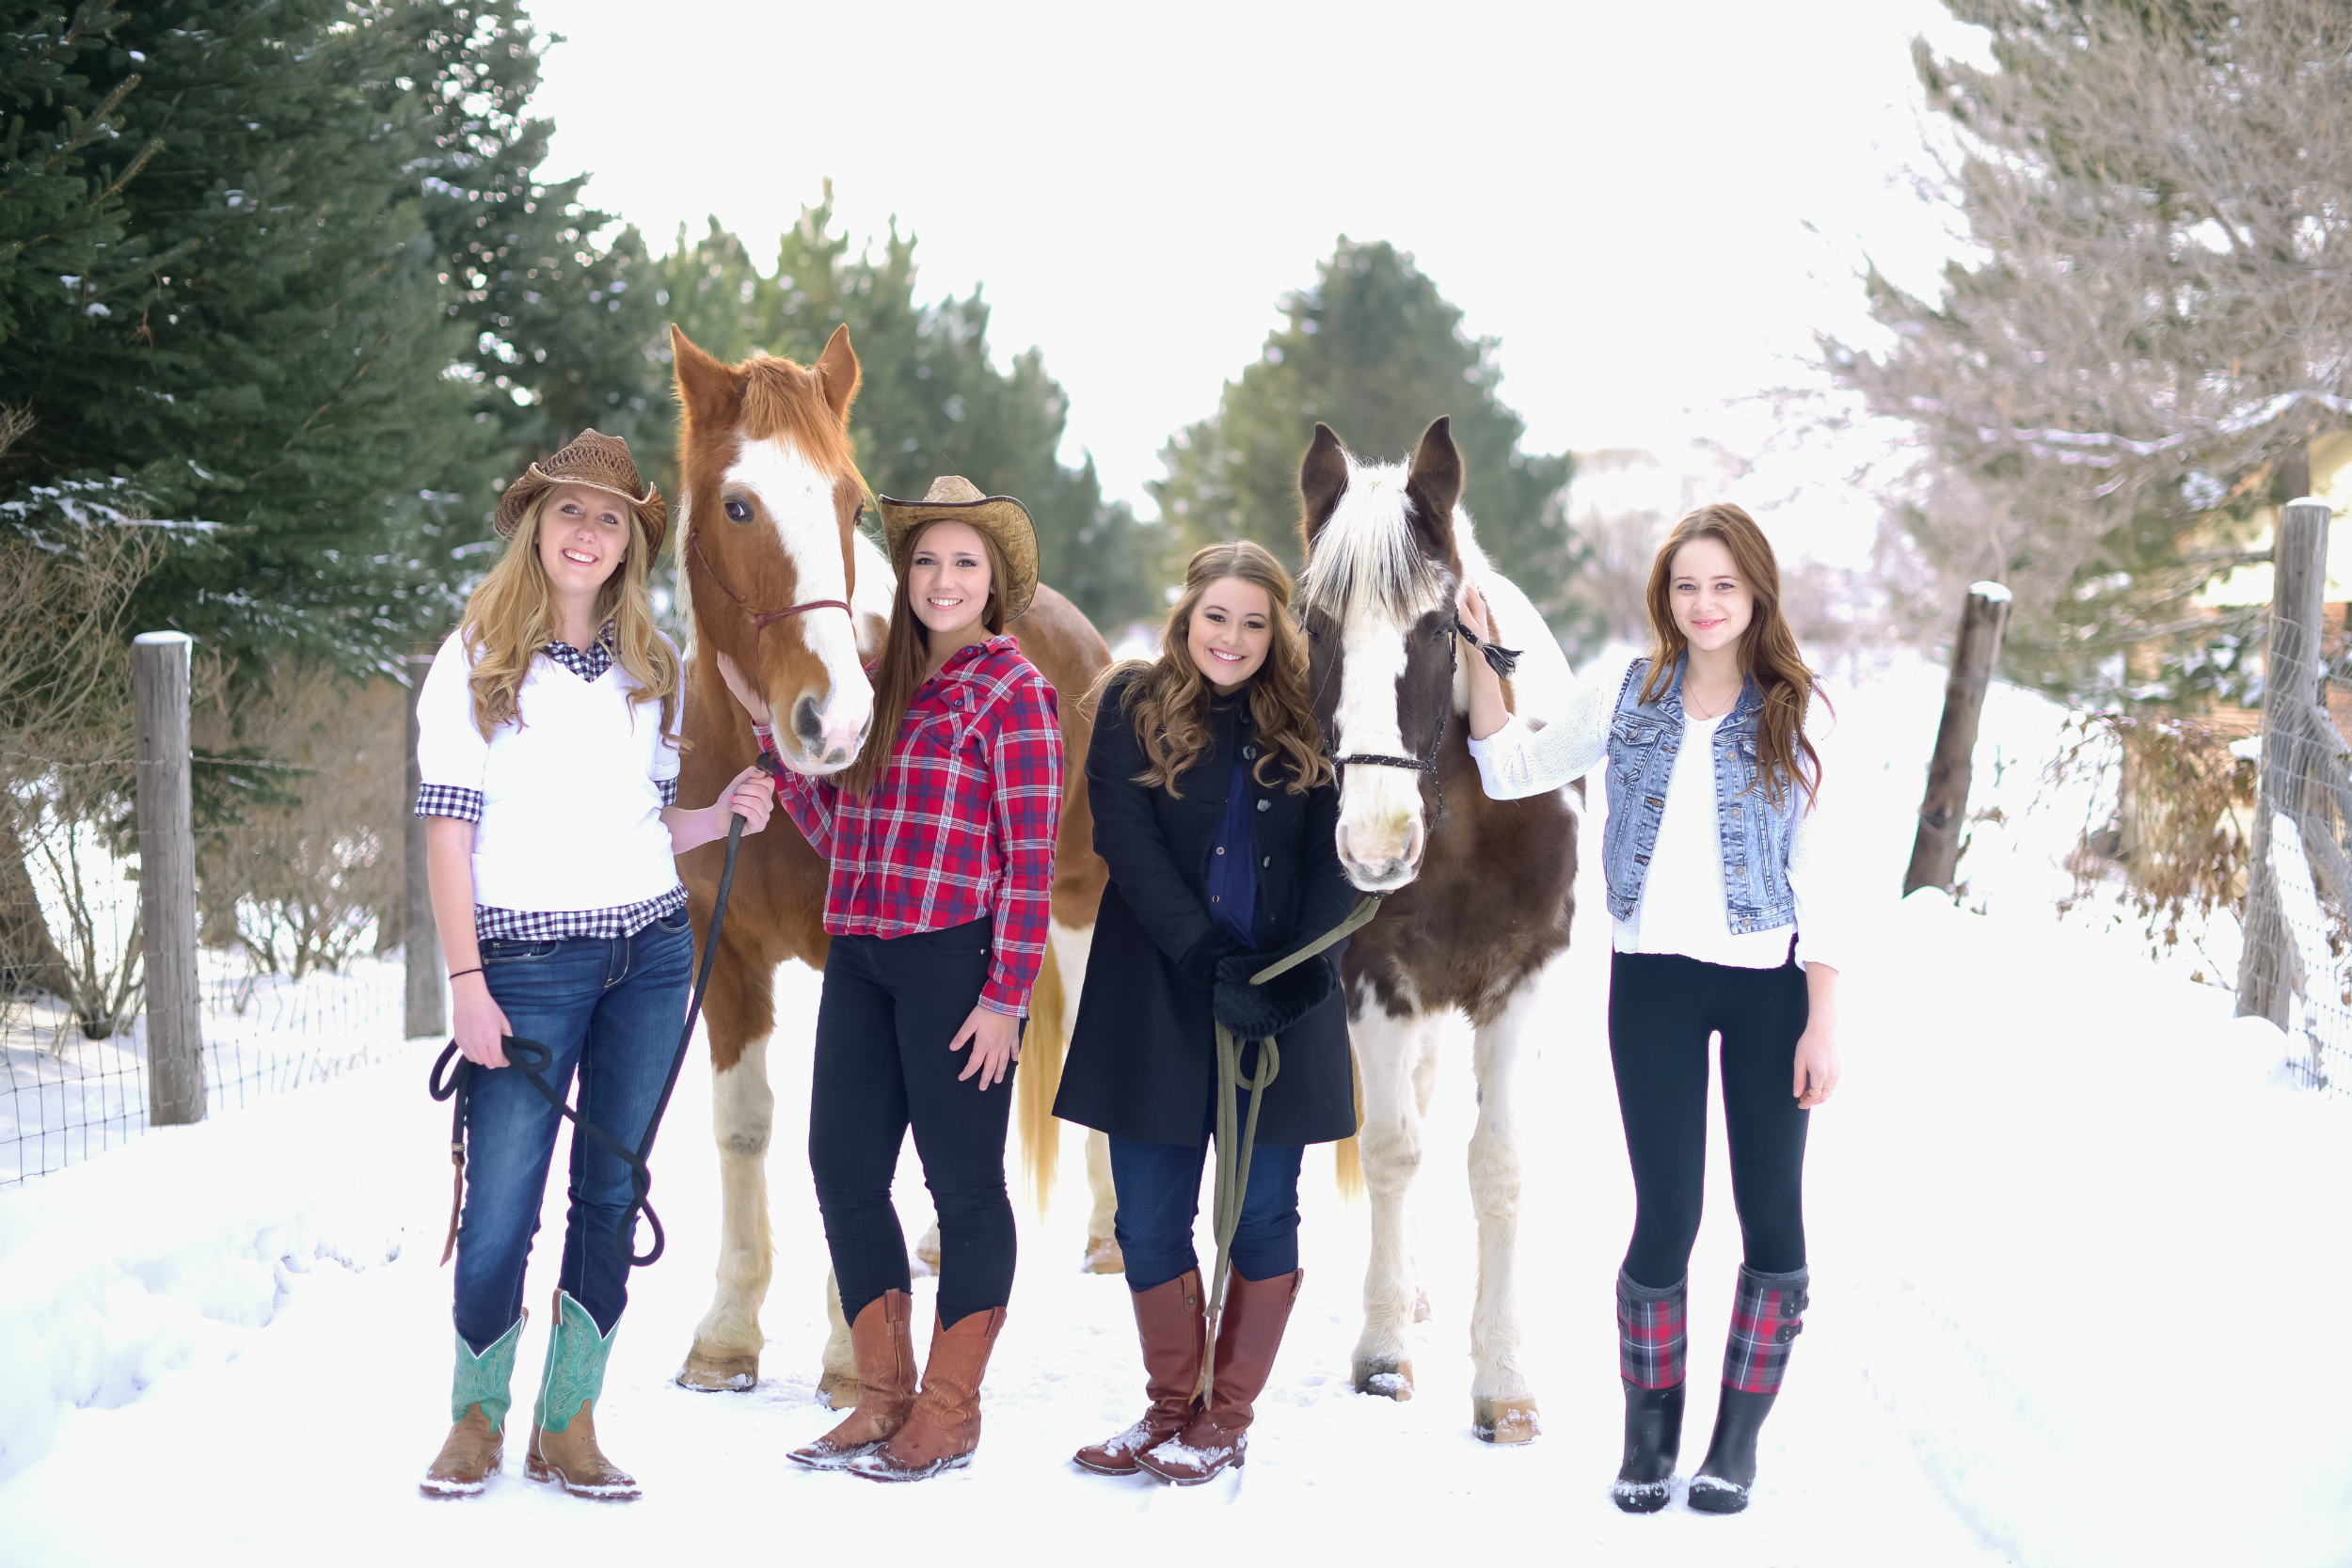 Bridle Up Hope: The Rachel Covey Foundation is a 501c(3) non-profit dedicated to helping young women build hope and confidence through equestrian training.